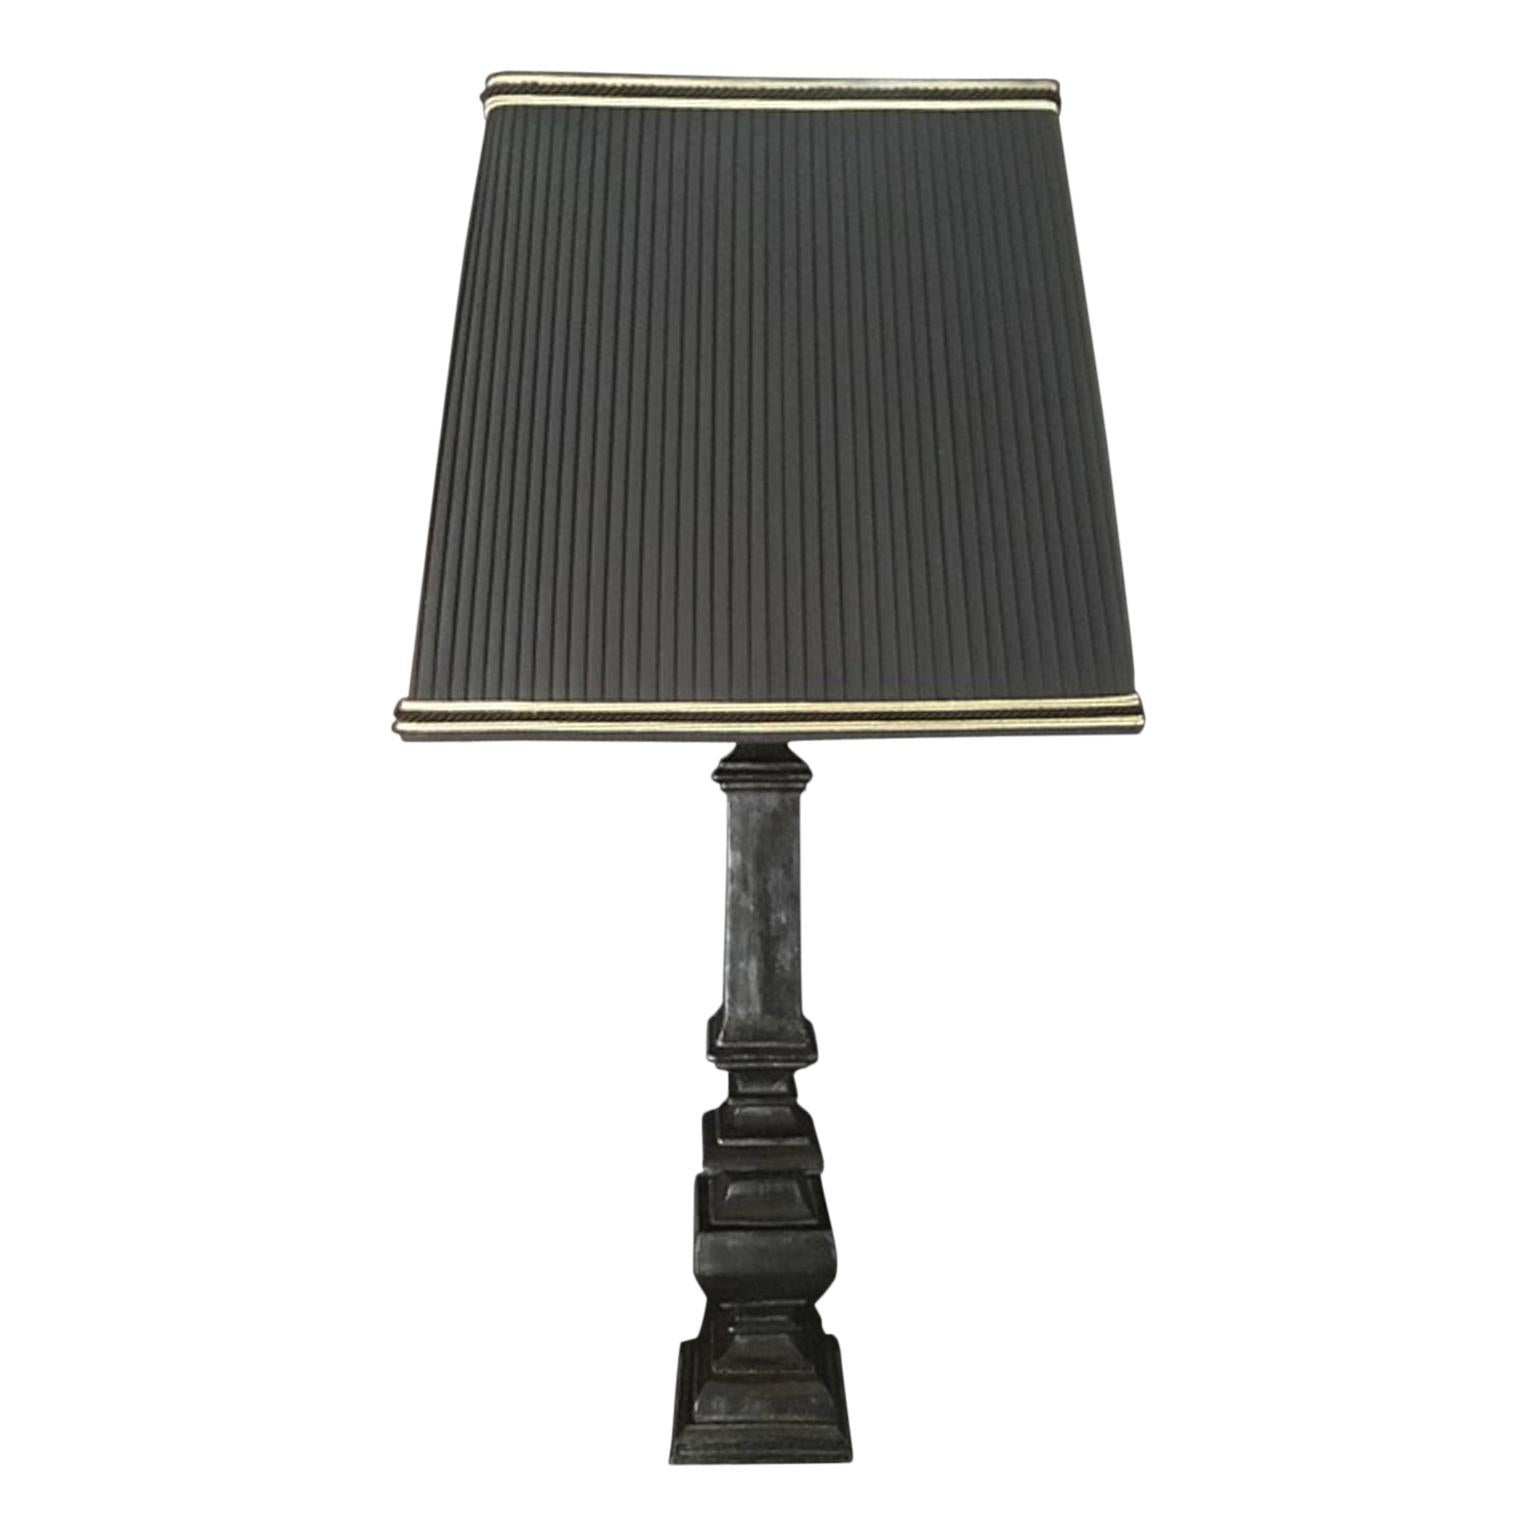 What is a softback lamp shade?